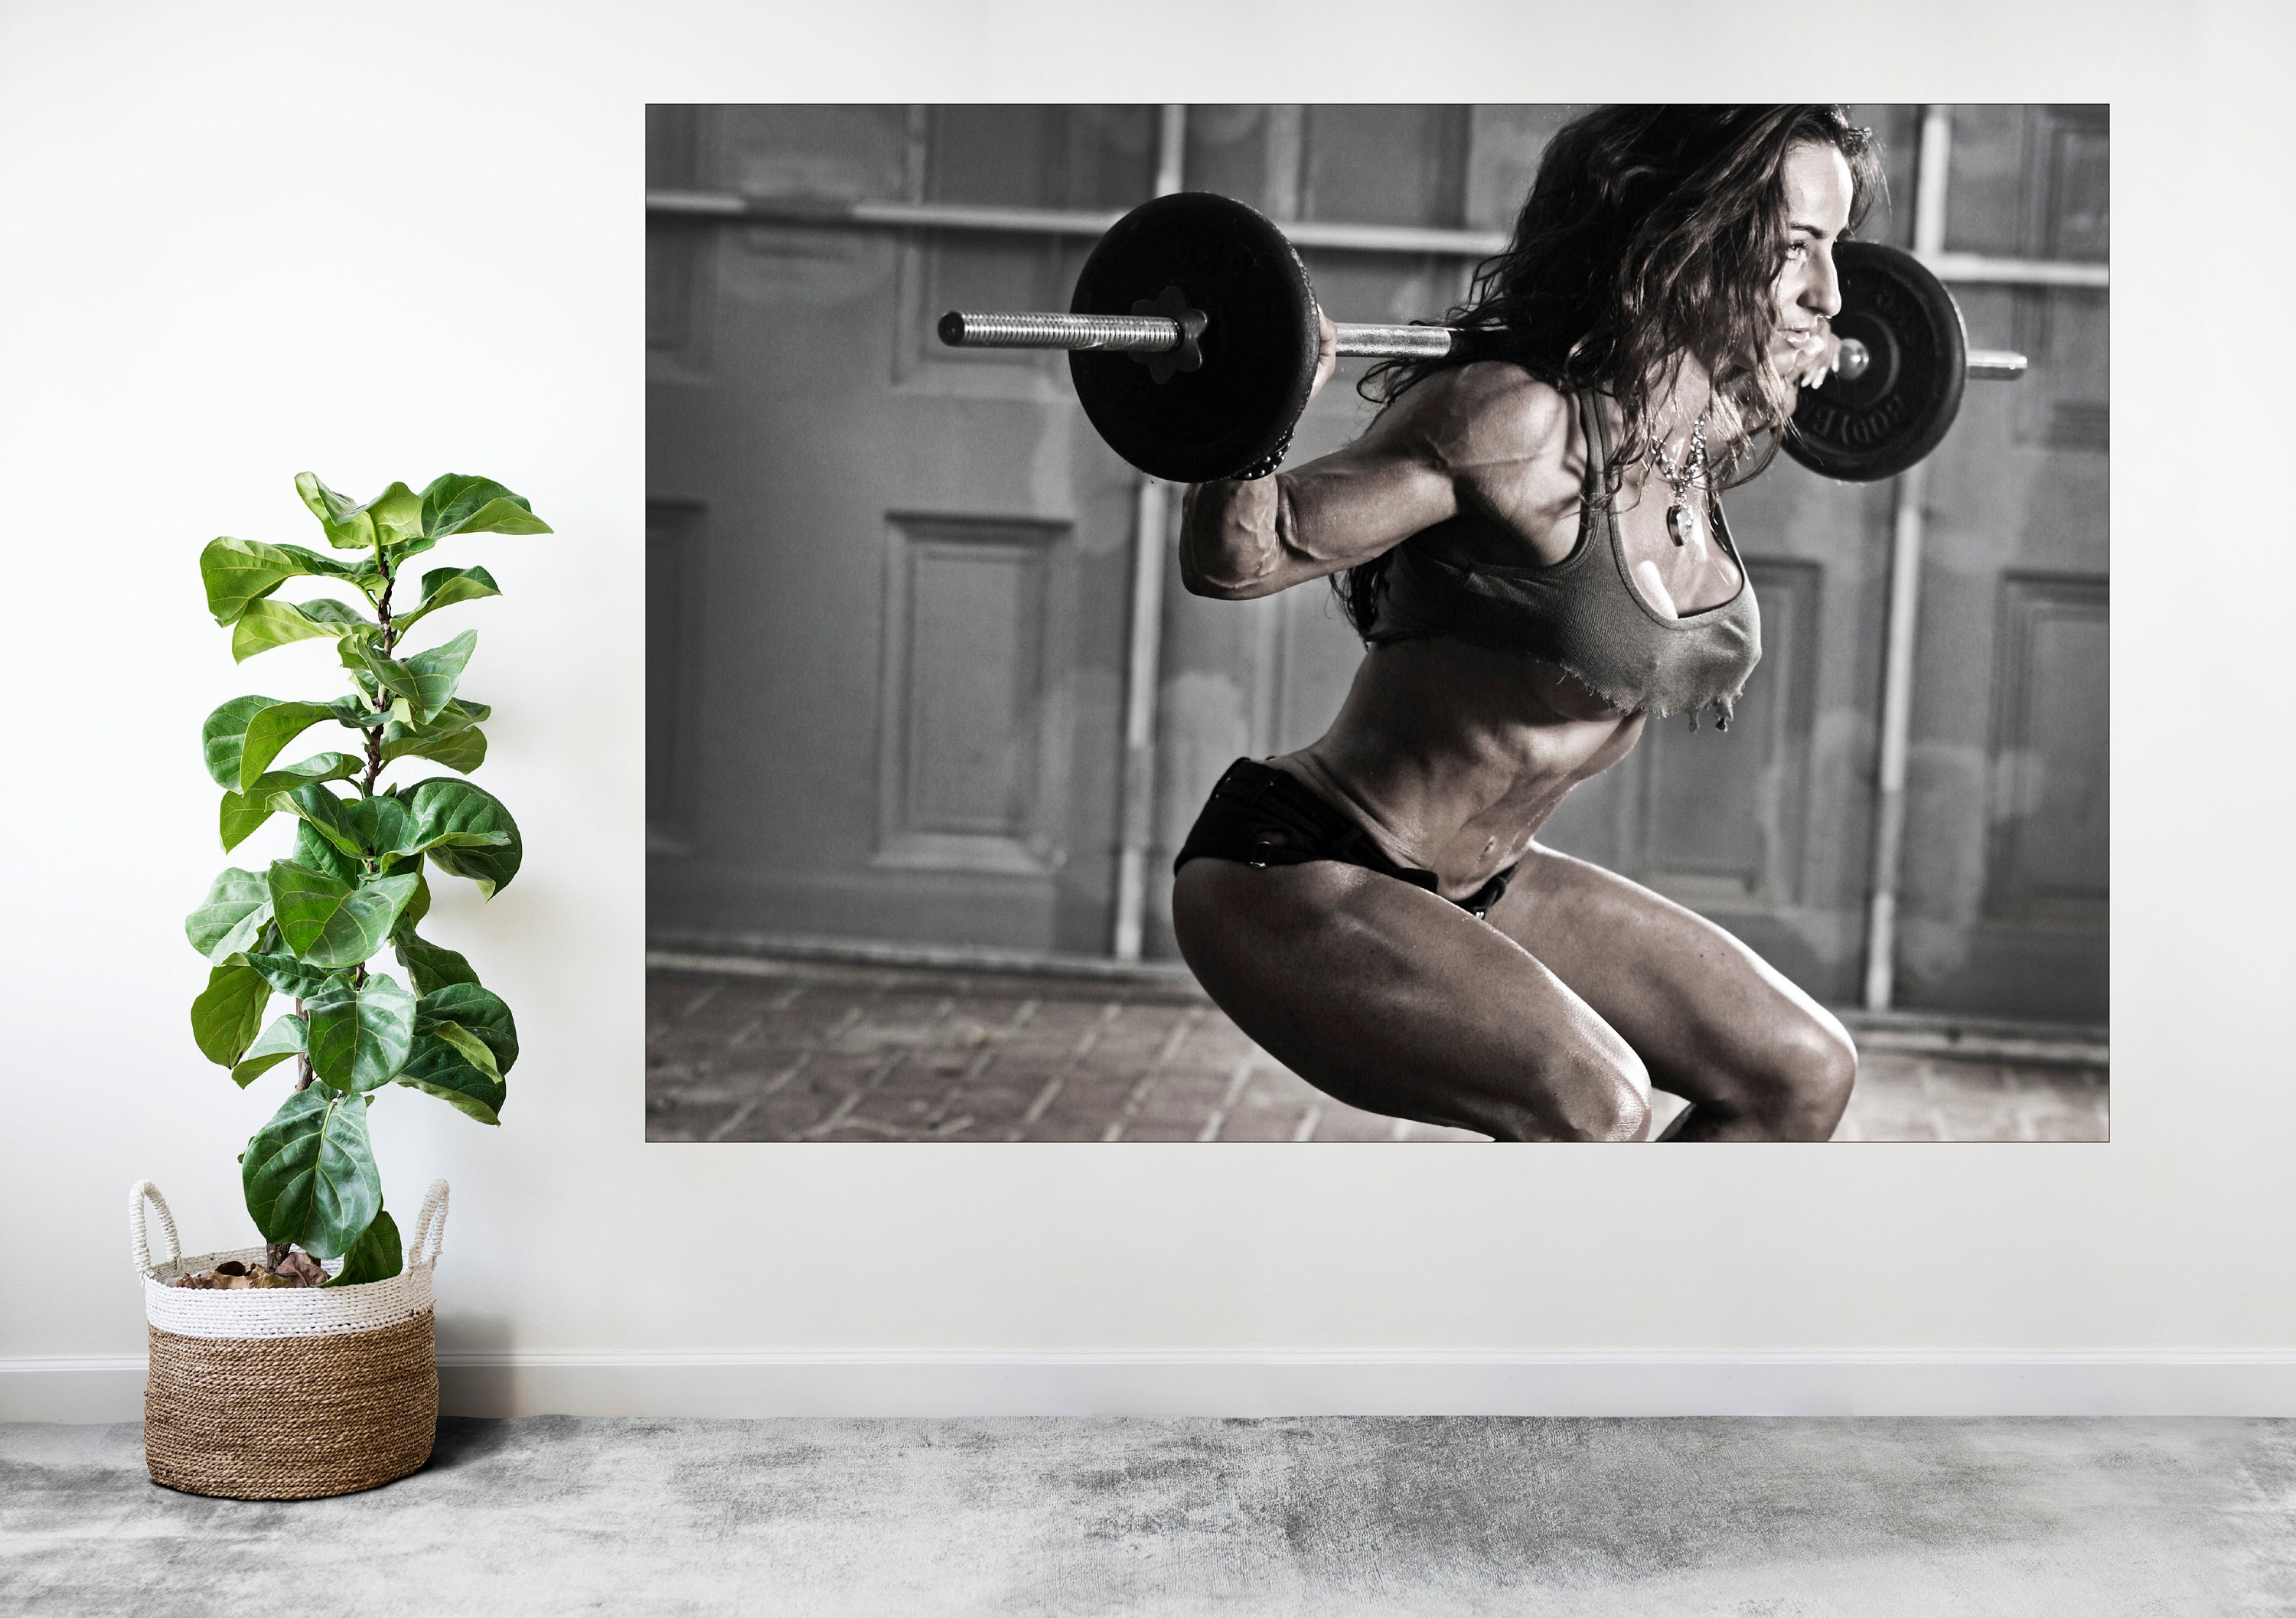  Sexy Bodybuilding Girl Posters Gym Wall Art Gift Sexy Woman  Fitness Sports Gym Fitness Lovers Pictures Decor Canvas Painting Posters  And Prints Wall Art Pictures for Living Room Bedroom Decor 24x36in